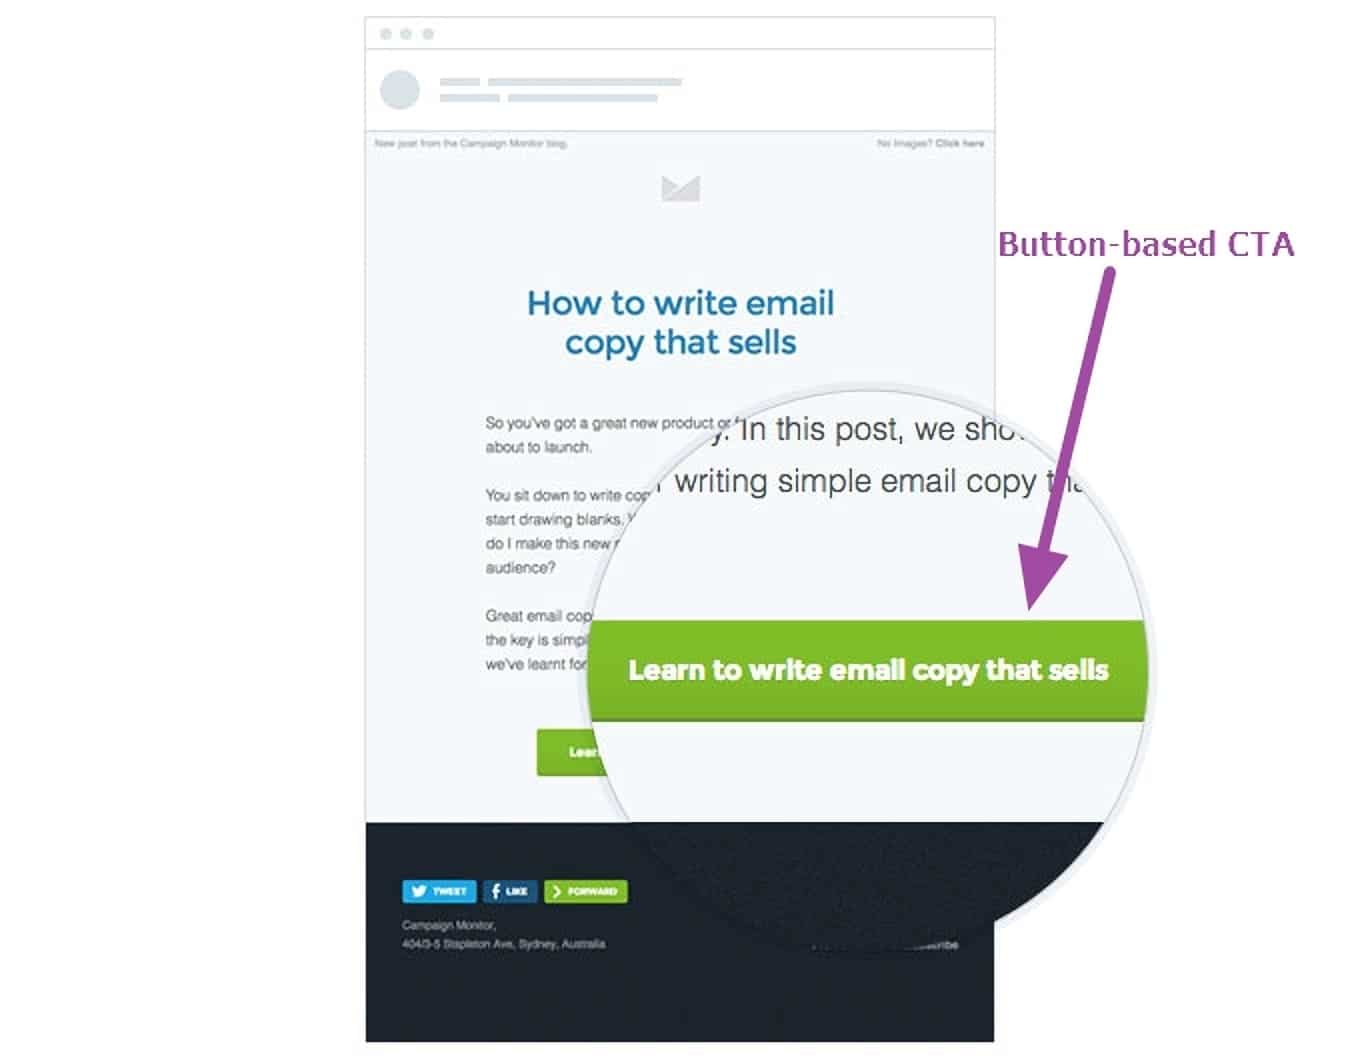 button-based CTA example by Campaign Monitor